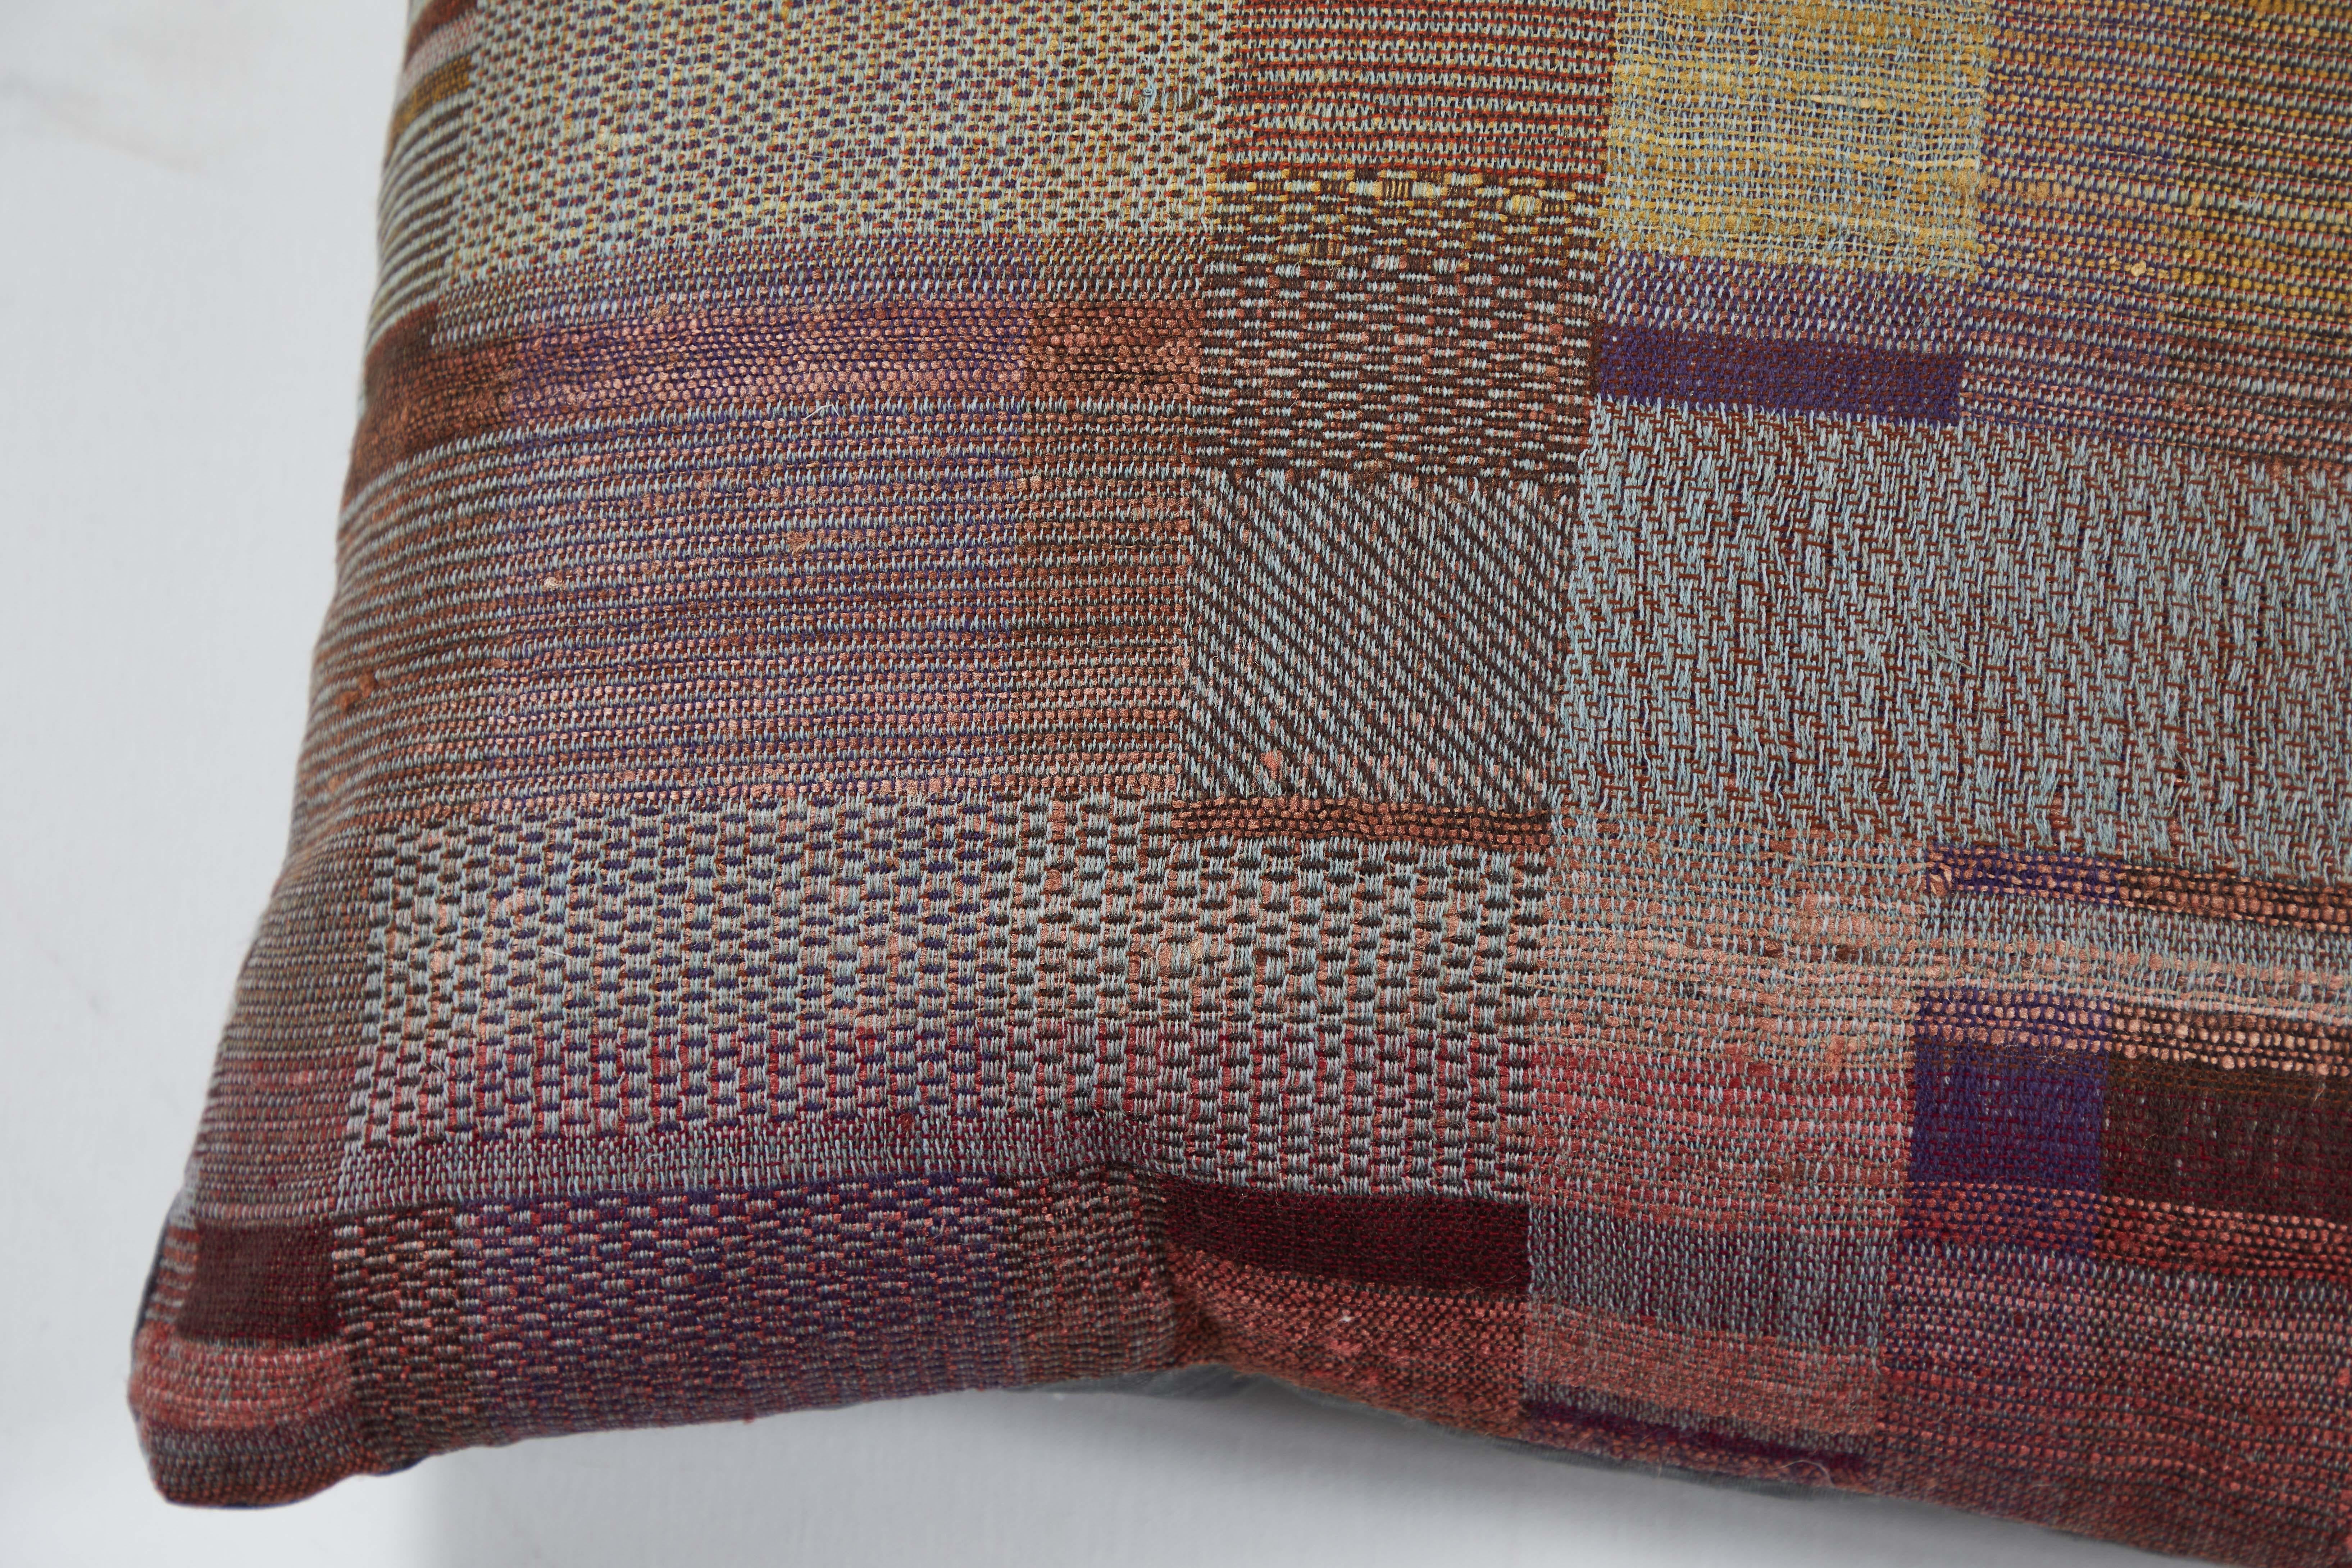 Hand-Woven Indian Handwoven Pillow Sunrise Plaid For Sale